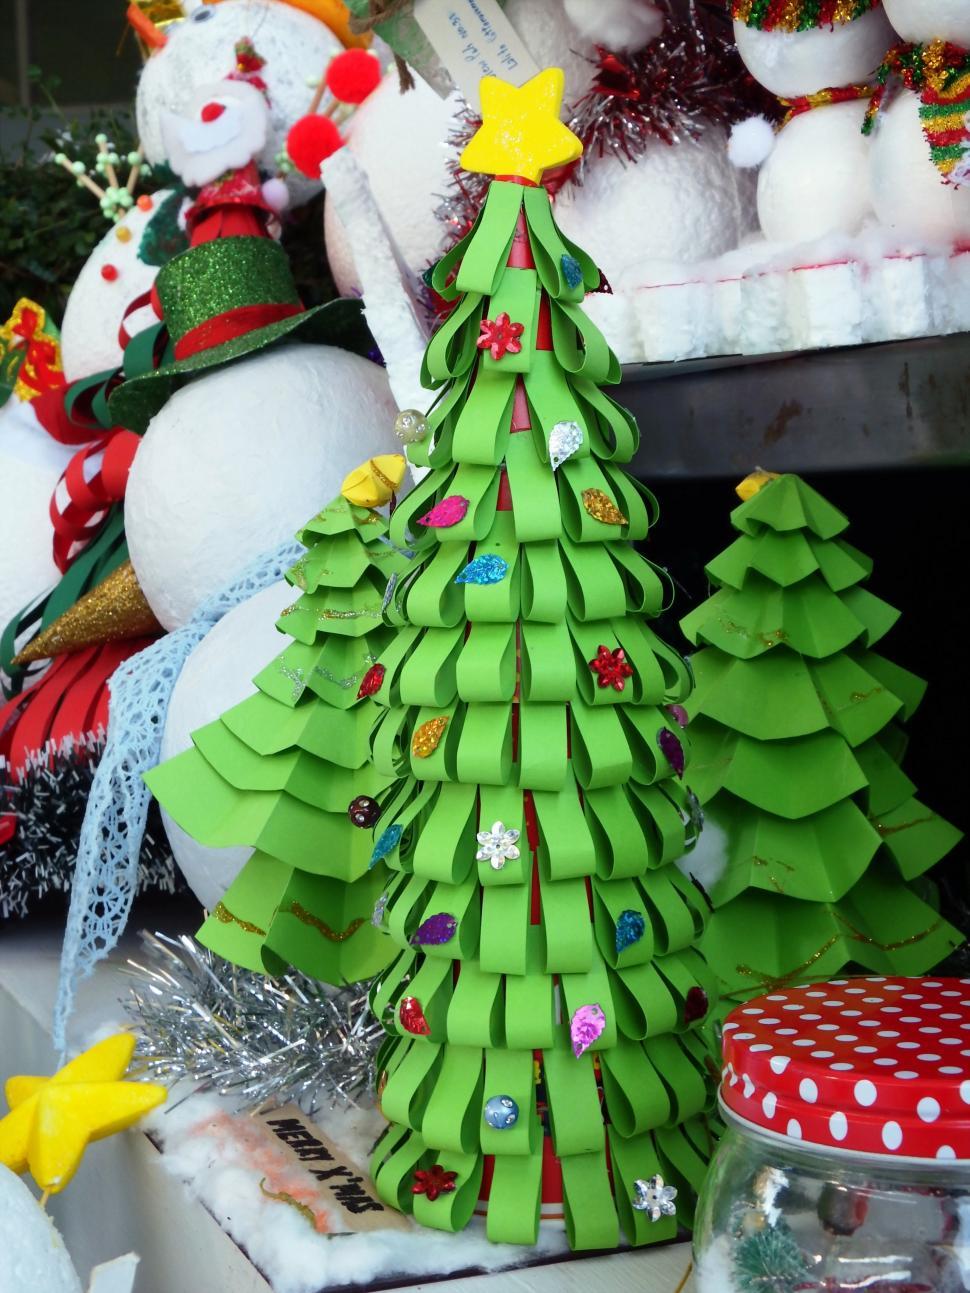 Download Free Stock Photo of Paper craft Christmas tree  